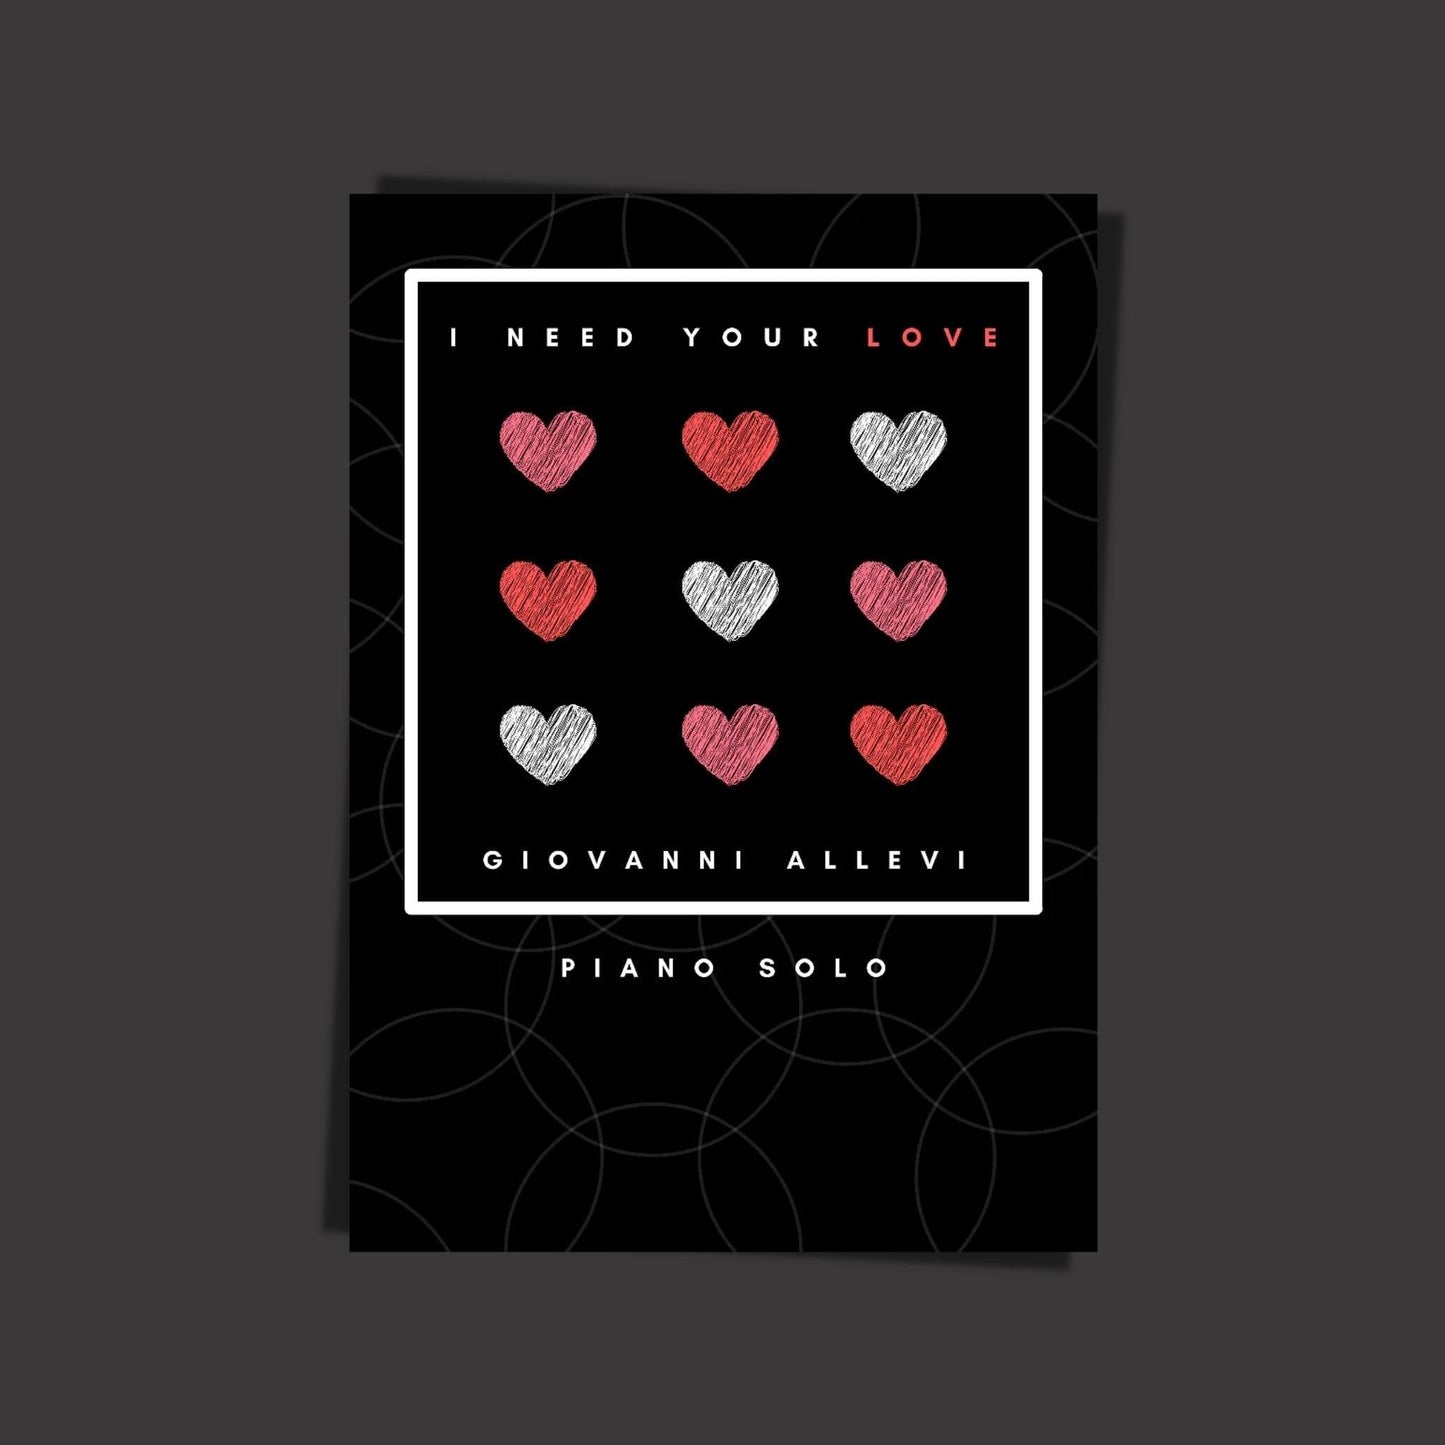 I NEED YOUR LOVE  by composer and pianist GIOVANNI ALLEVI - digital sheet music cover